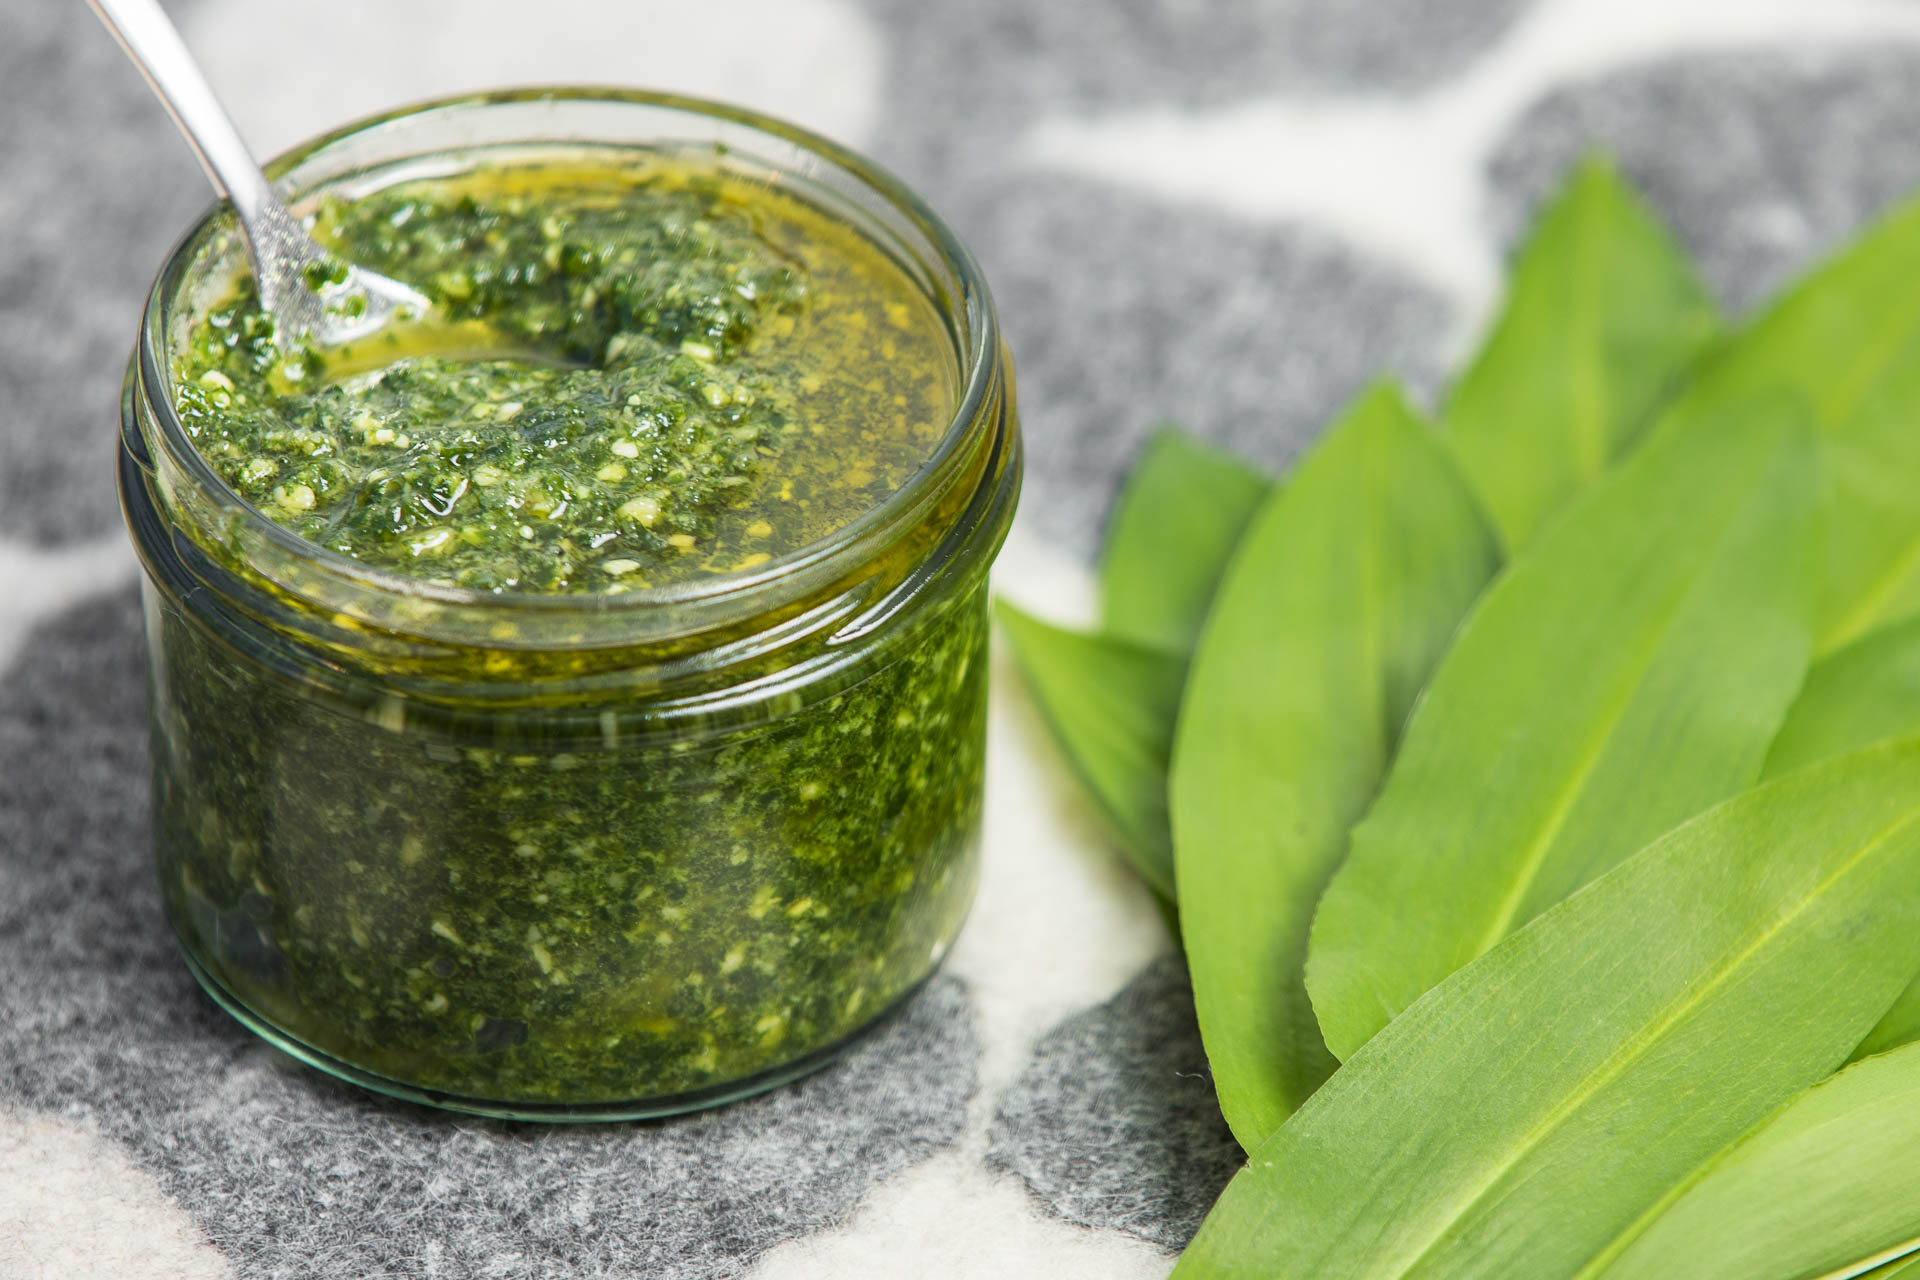 Wild Garlic – pesto and other delicious dishes   Gone20° N